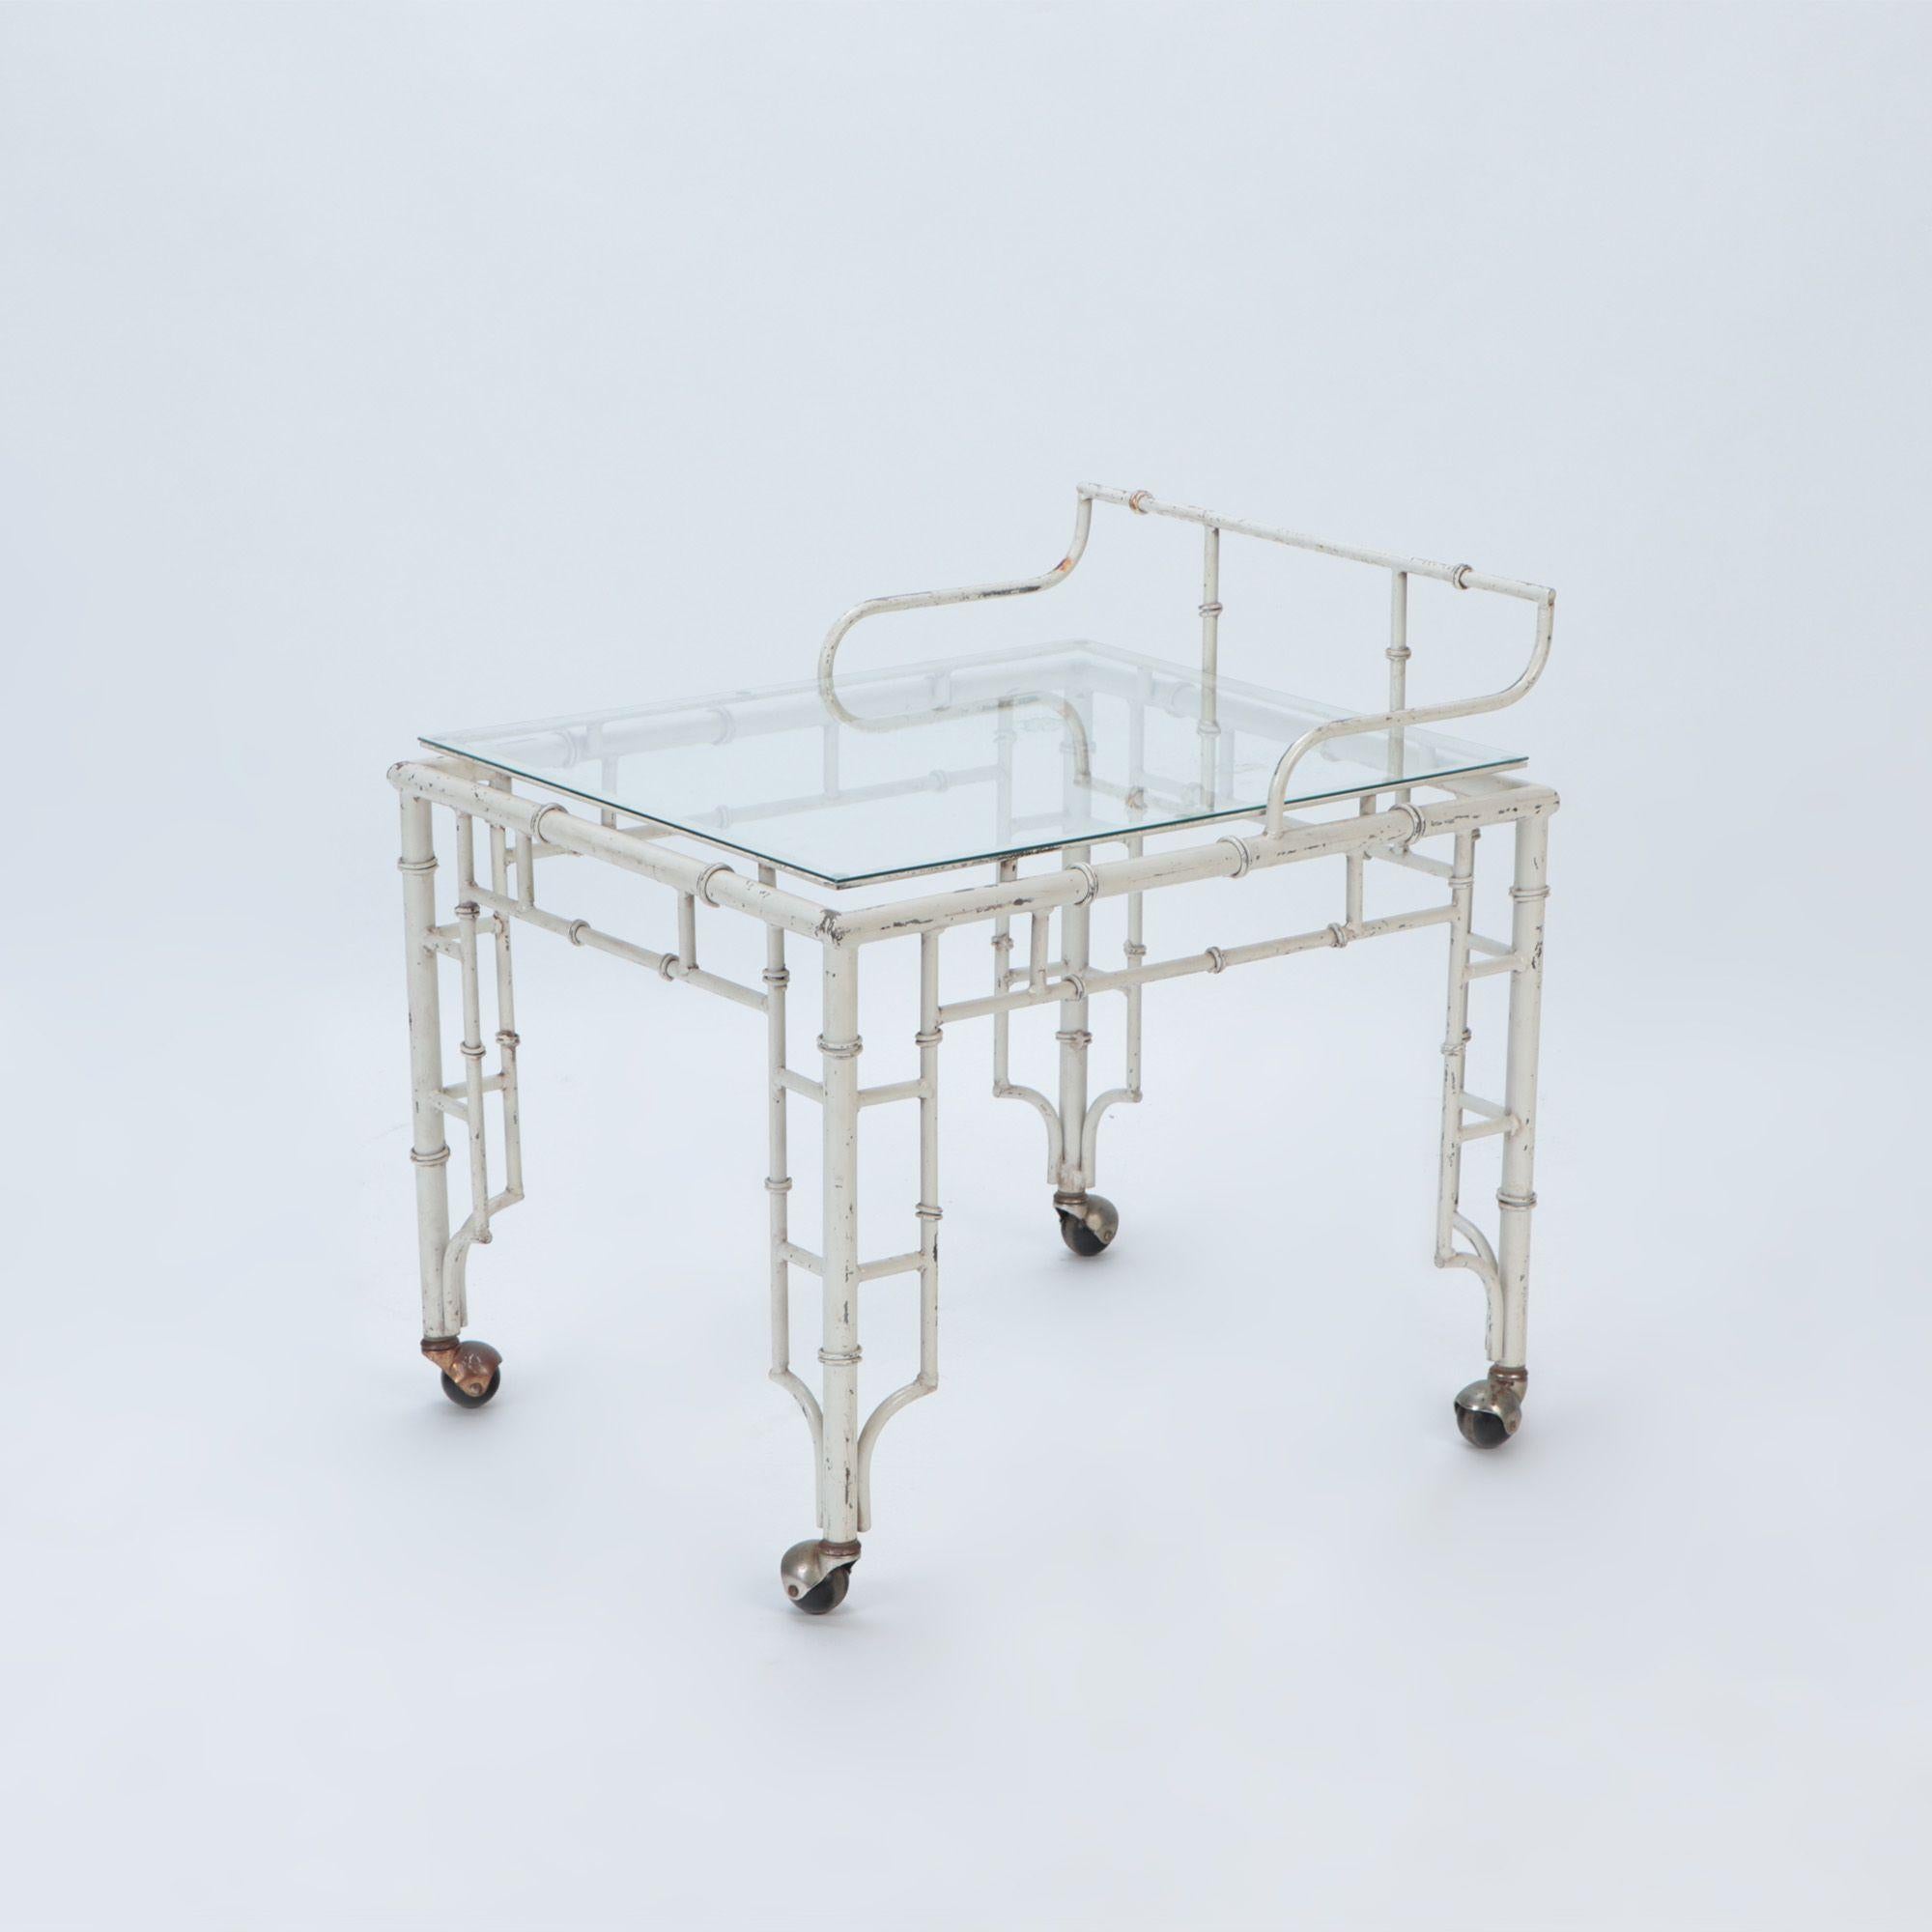 A pair of painted aluminum faux bamboo and glass bar carts, resting on four casters for easing mobility, circa 1970.